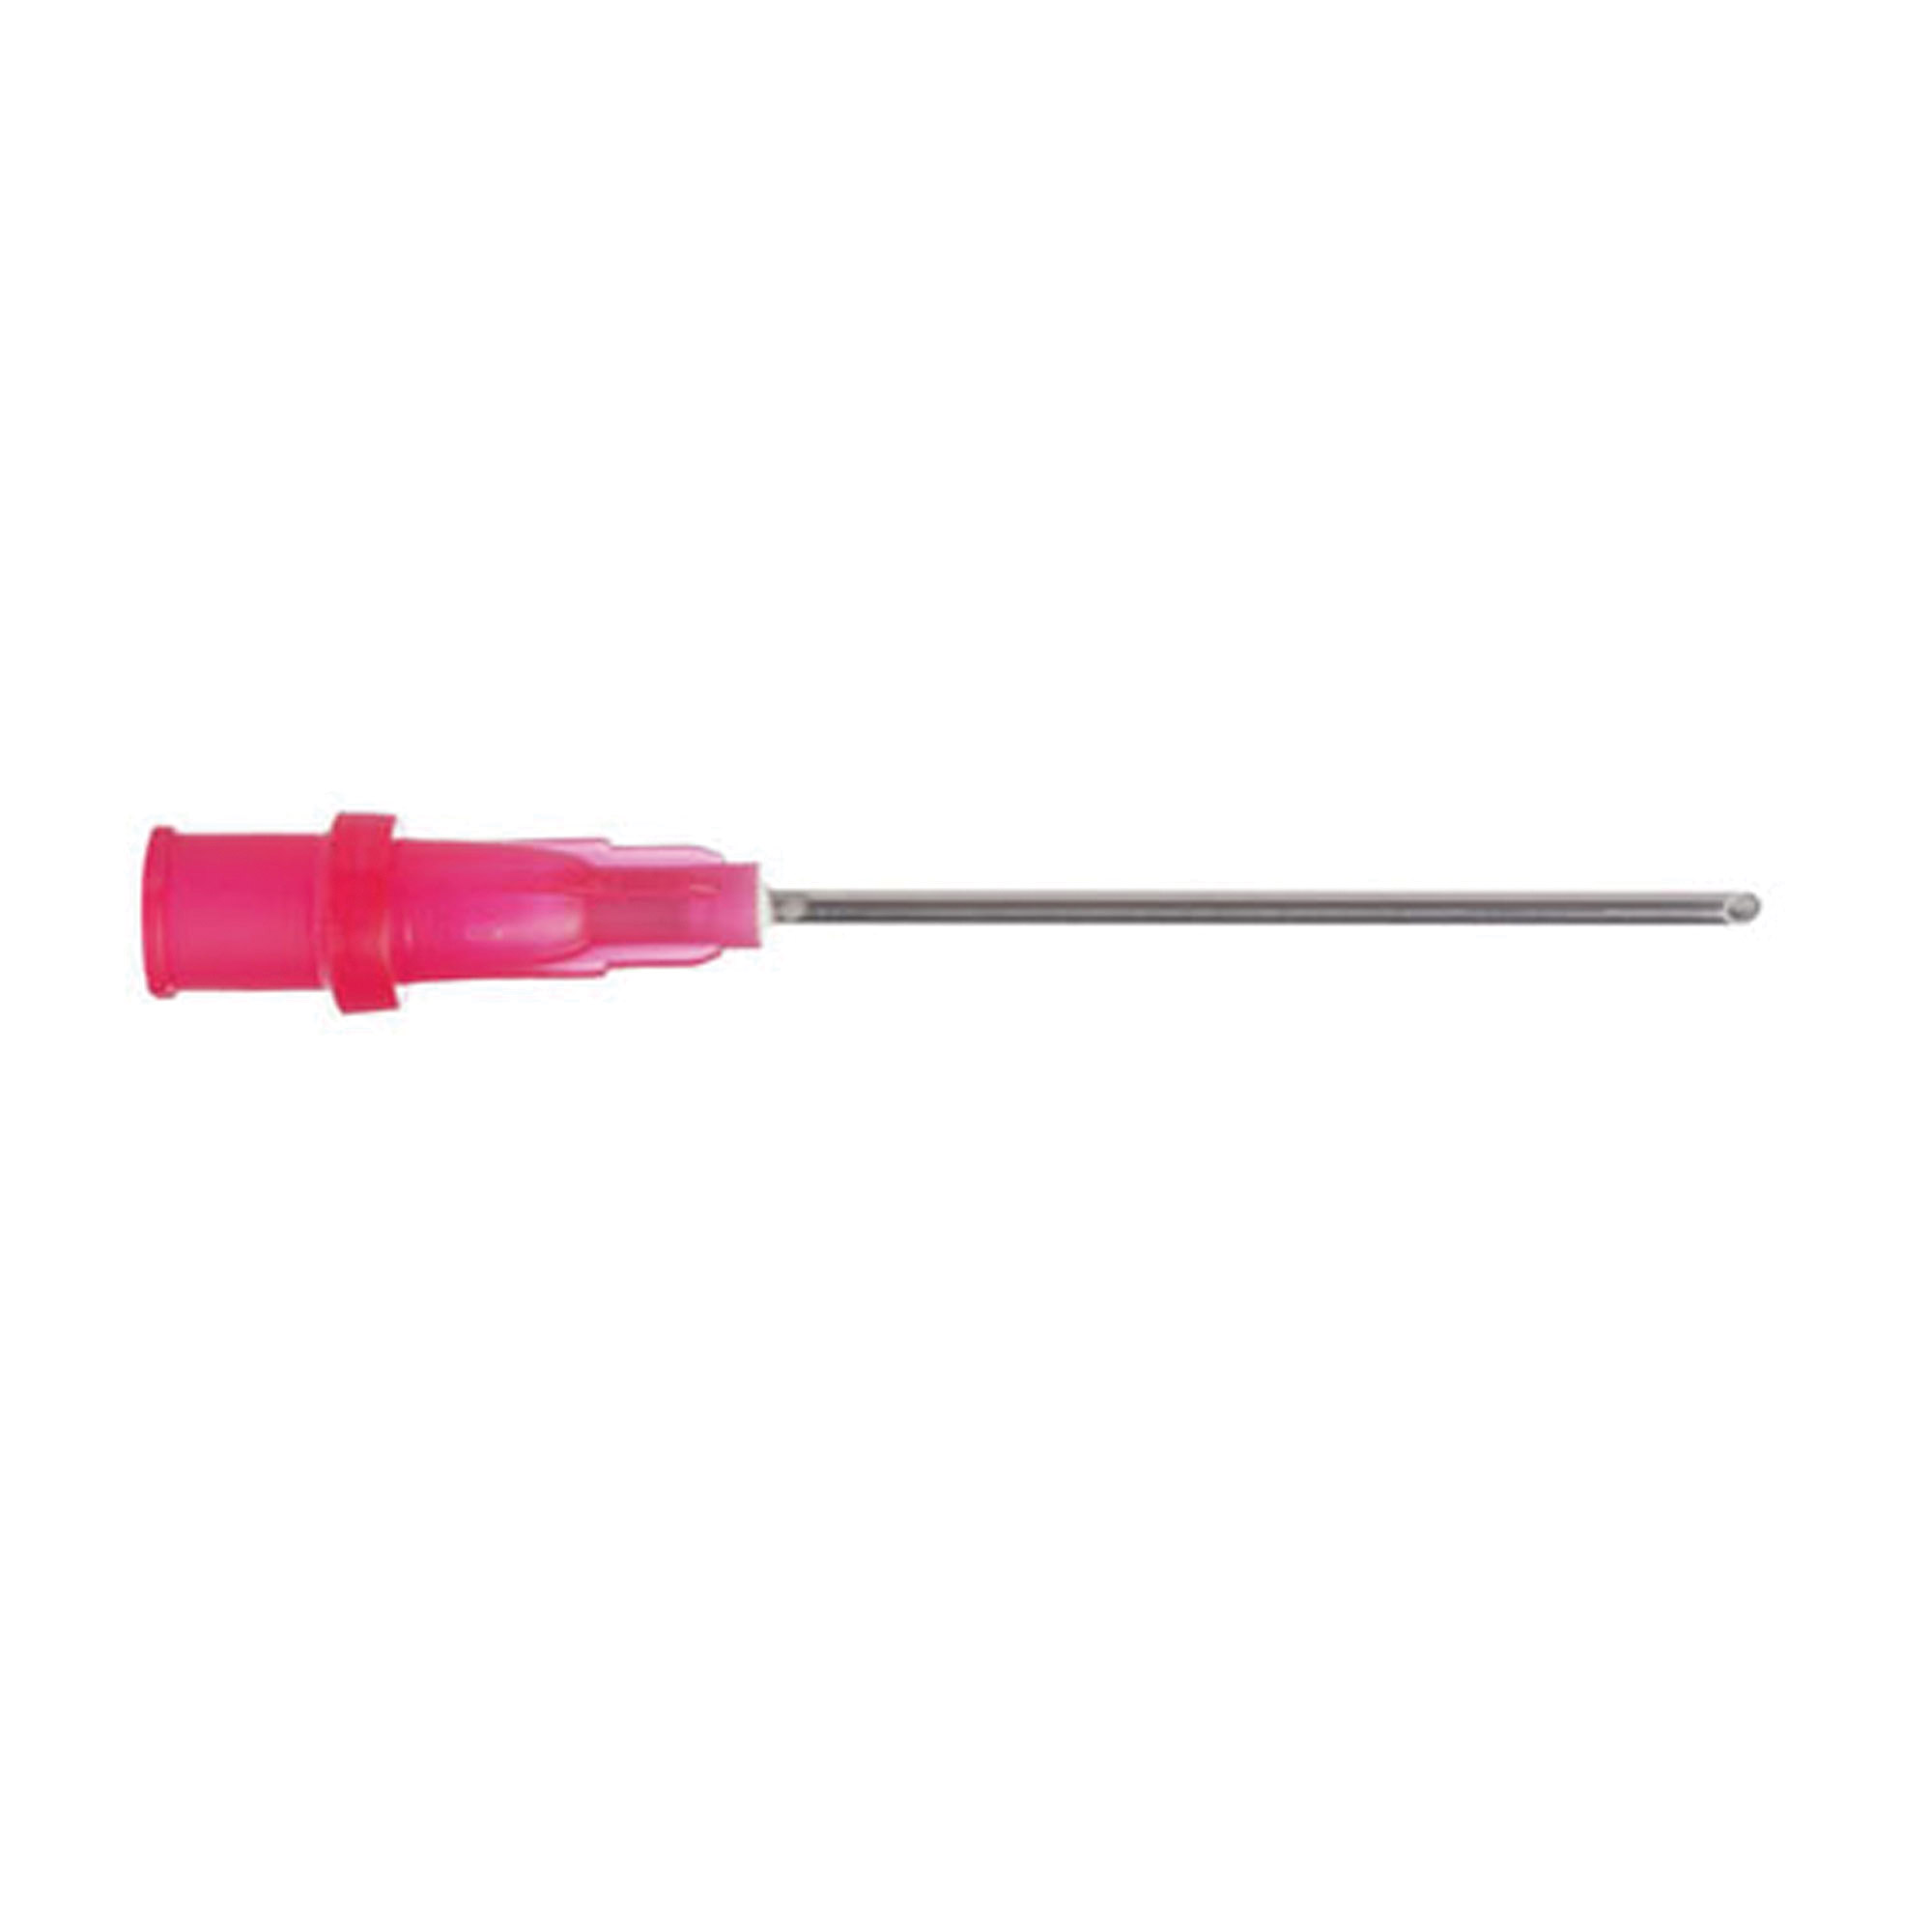 SOL - CARE Blunt Fill Needle with Filter 18Gx1 1/2 with 5 Micron Filter